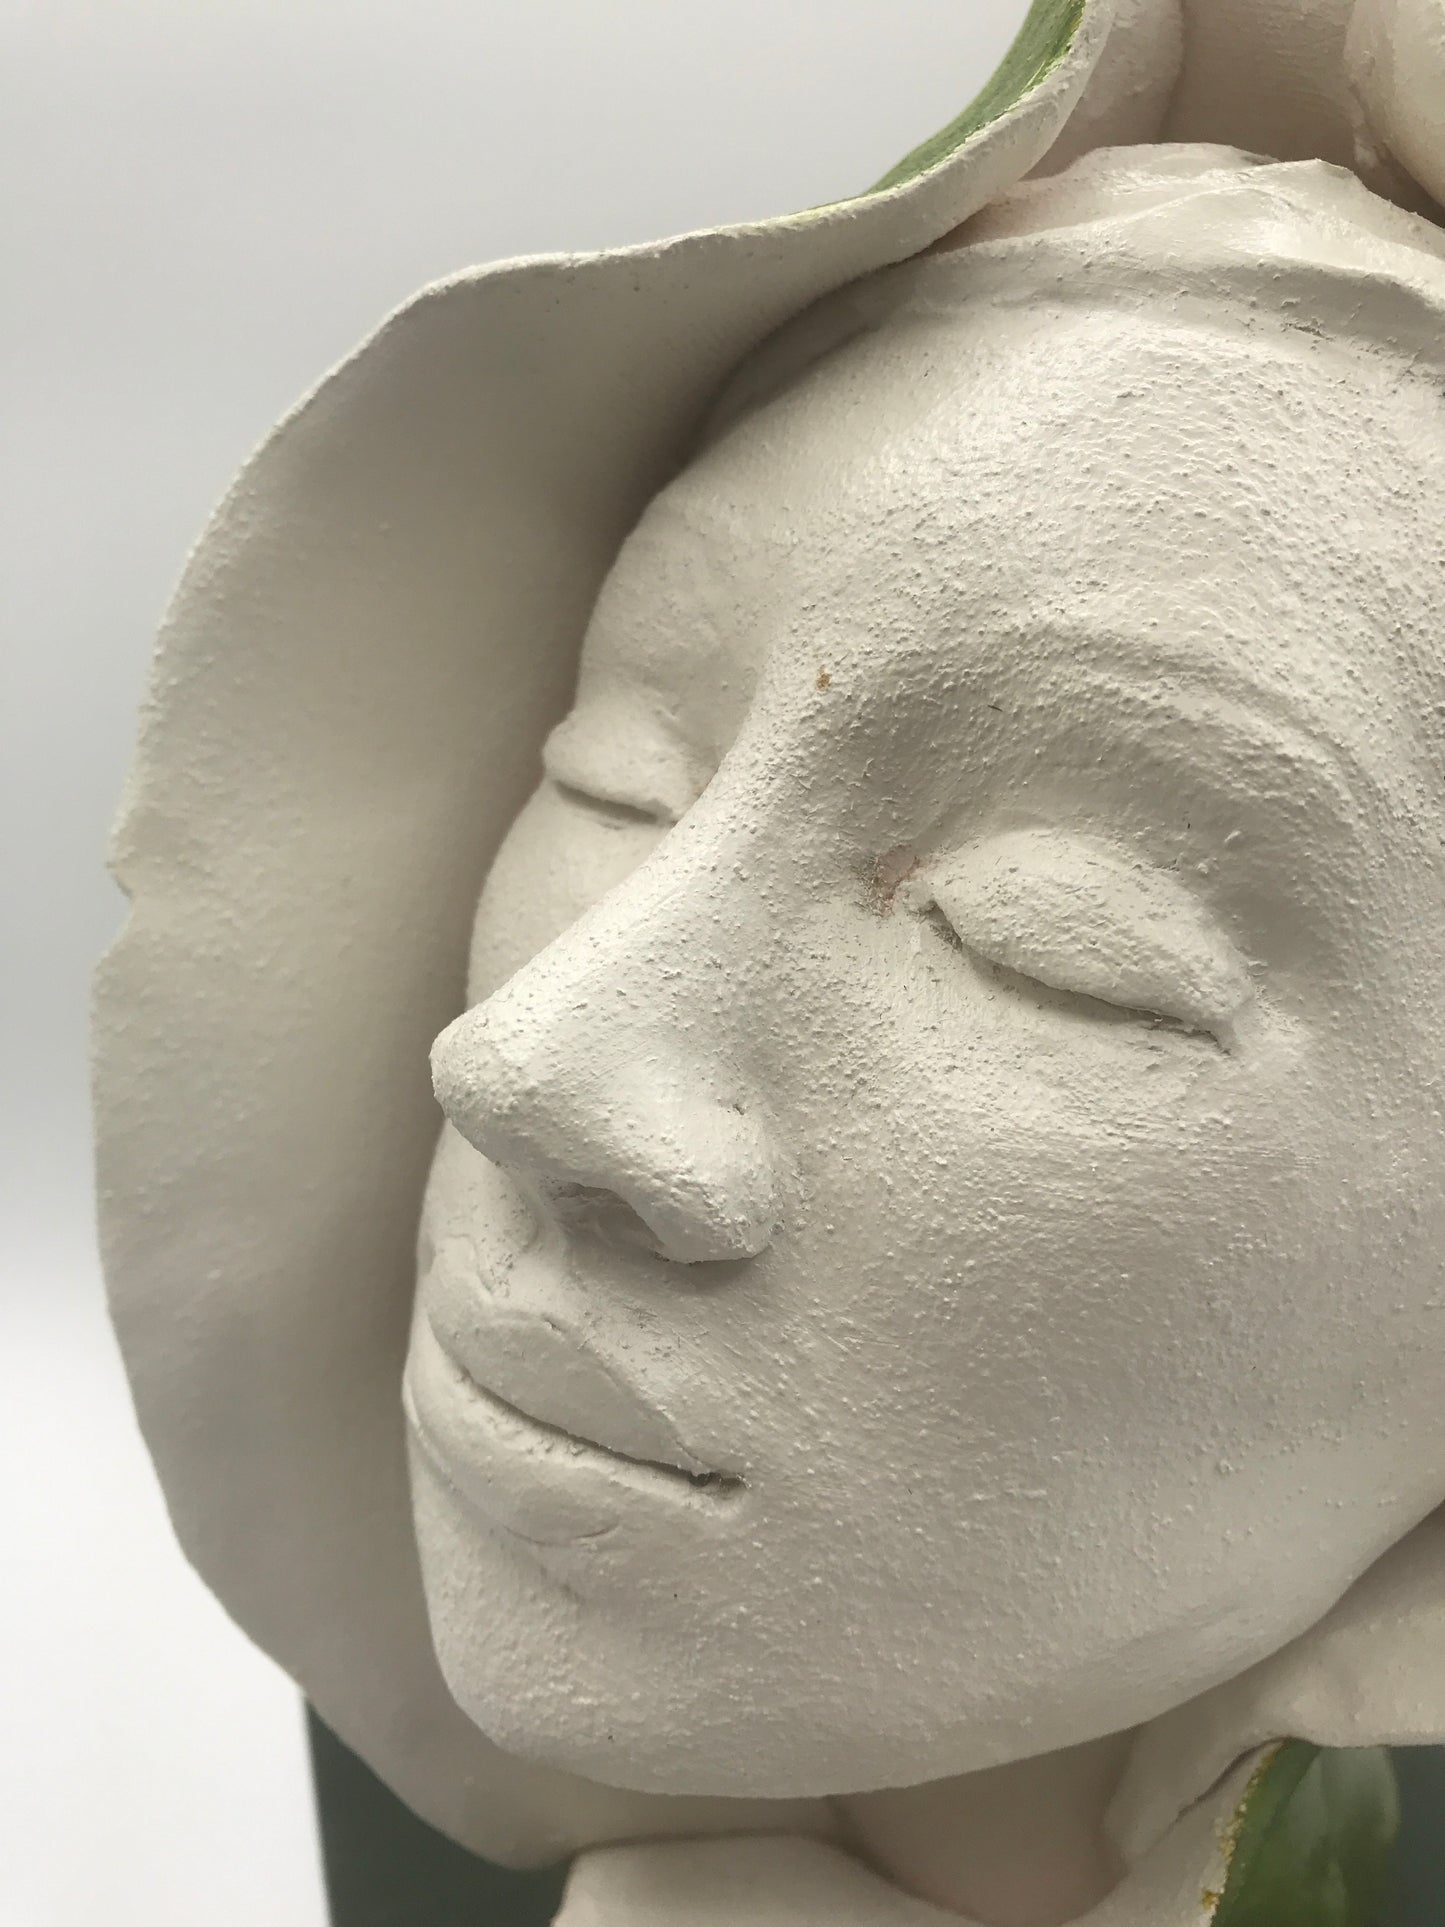 clay sculpture of woman's face emerging from a green bud. closeup shot showing grog - texture - in clay.